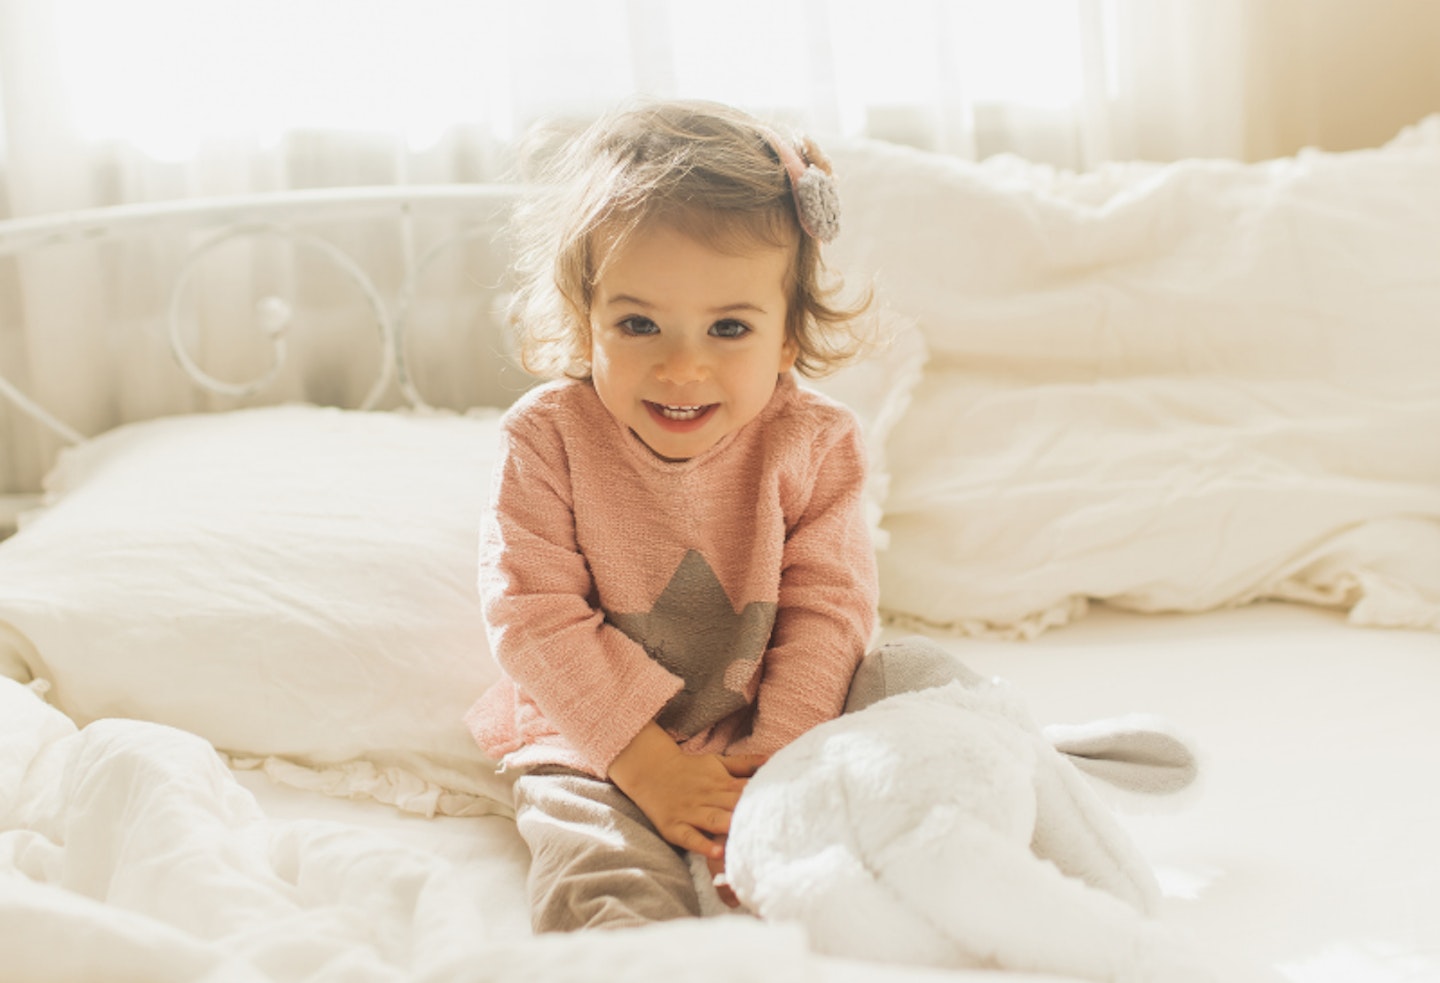 How to handle toddler sleep regression